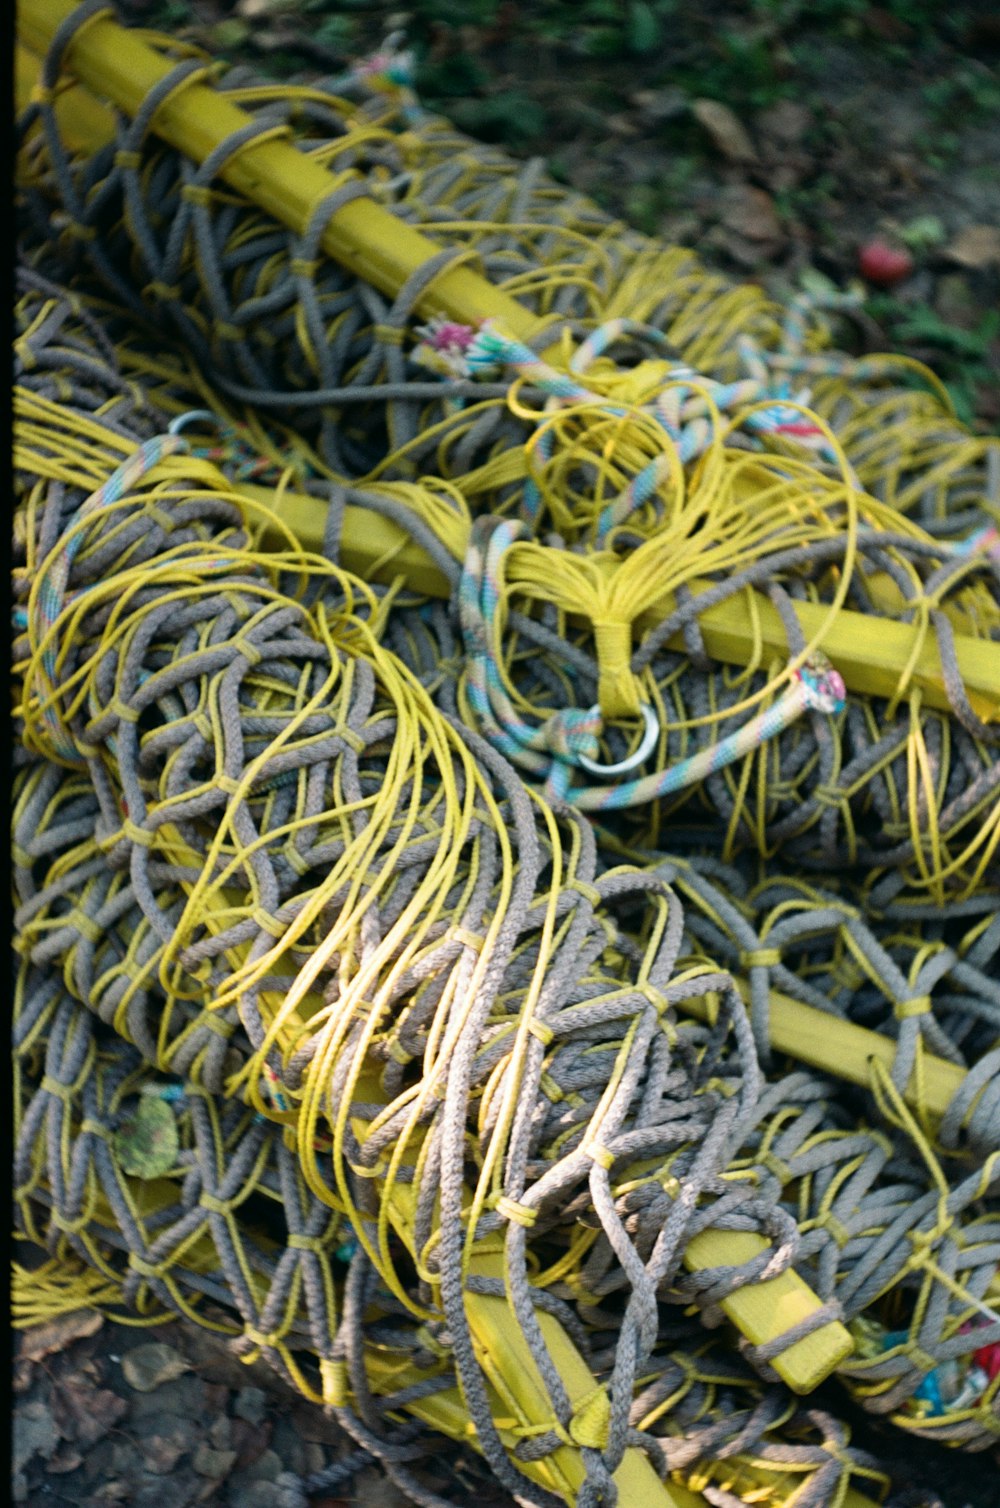 a pile of yellow and gray ropes on the ground